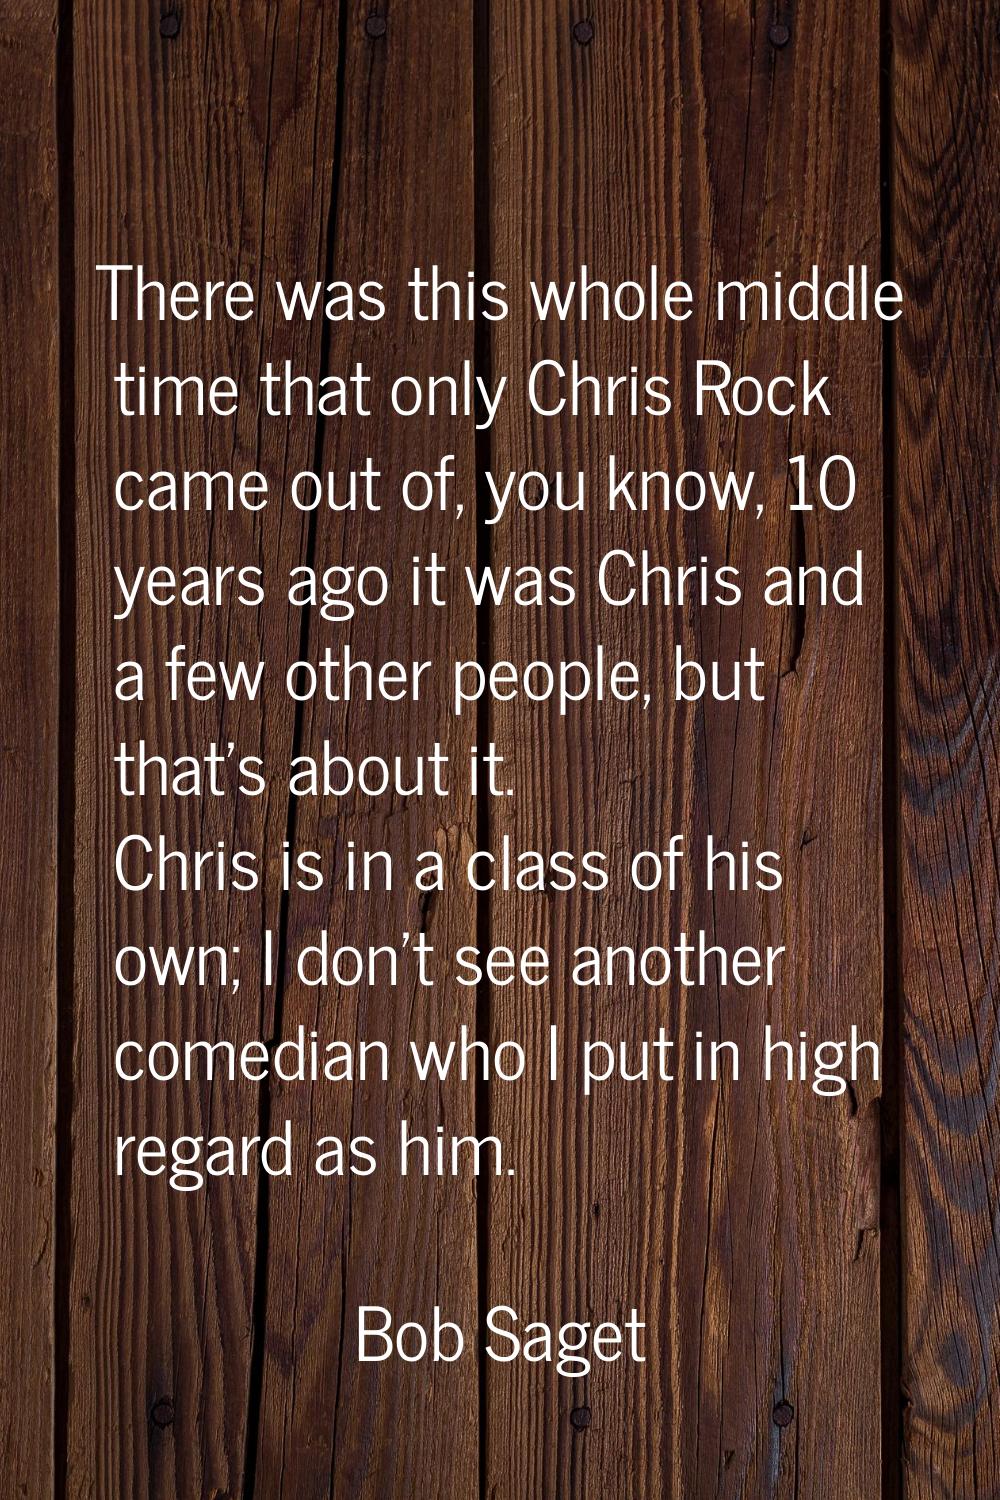 There was this whole middle time that only Chris Rock came out of, you know, 10 years ago it was Ch